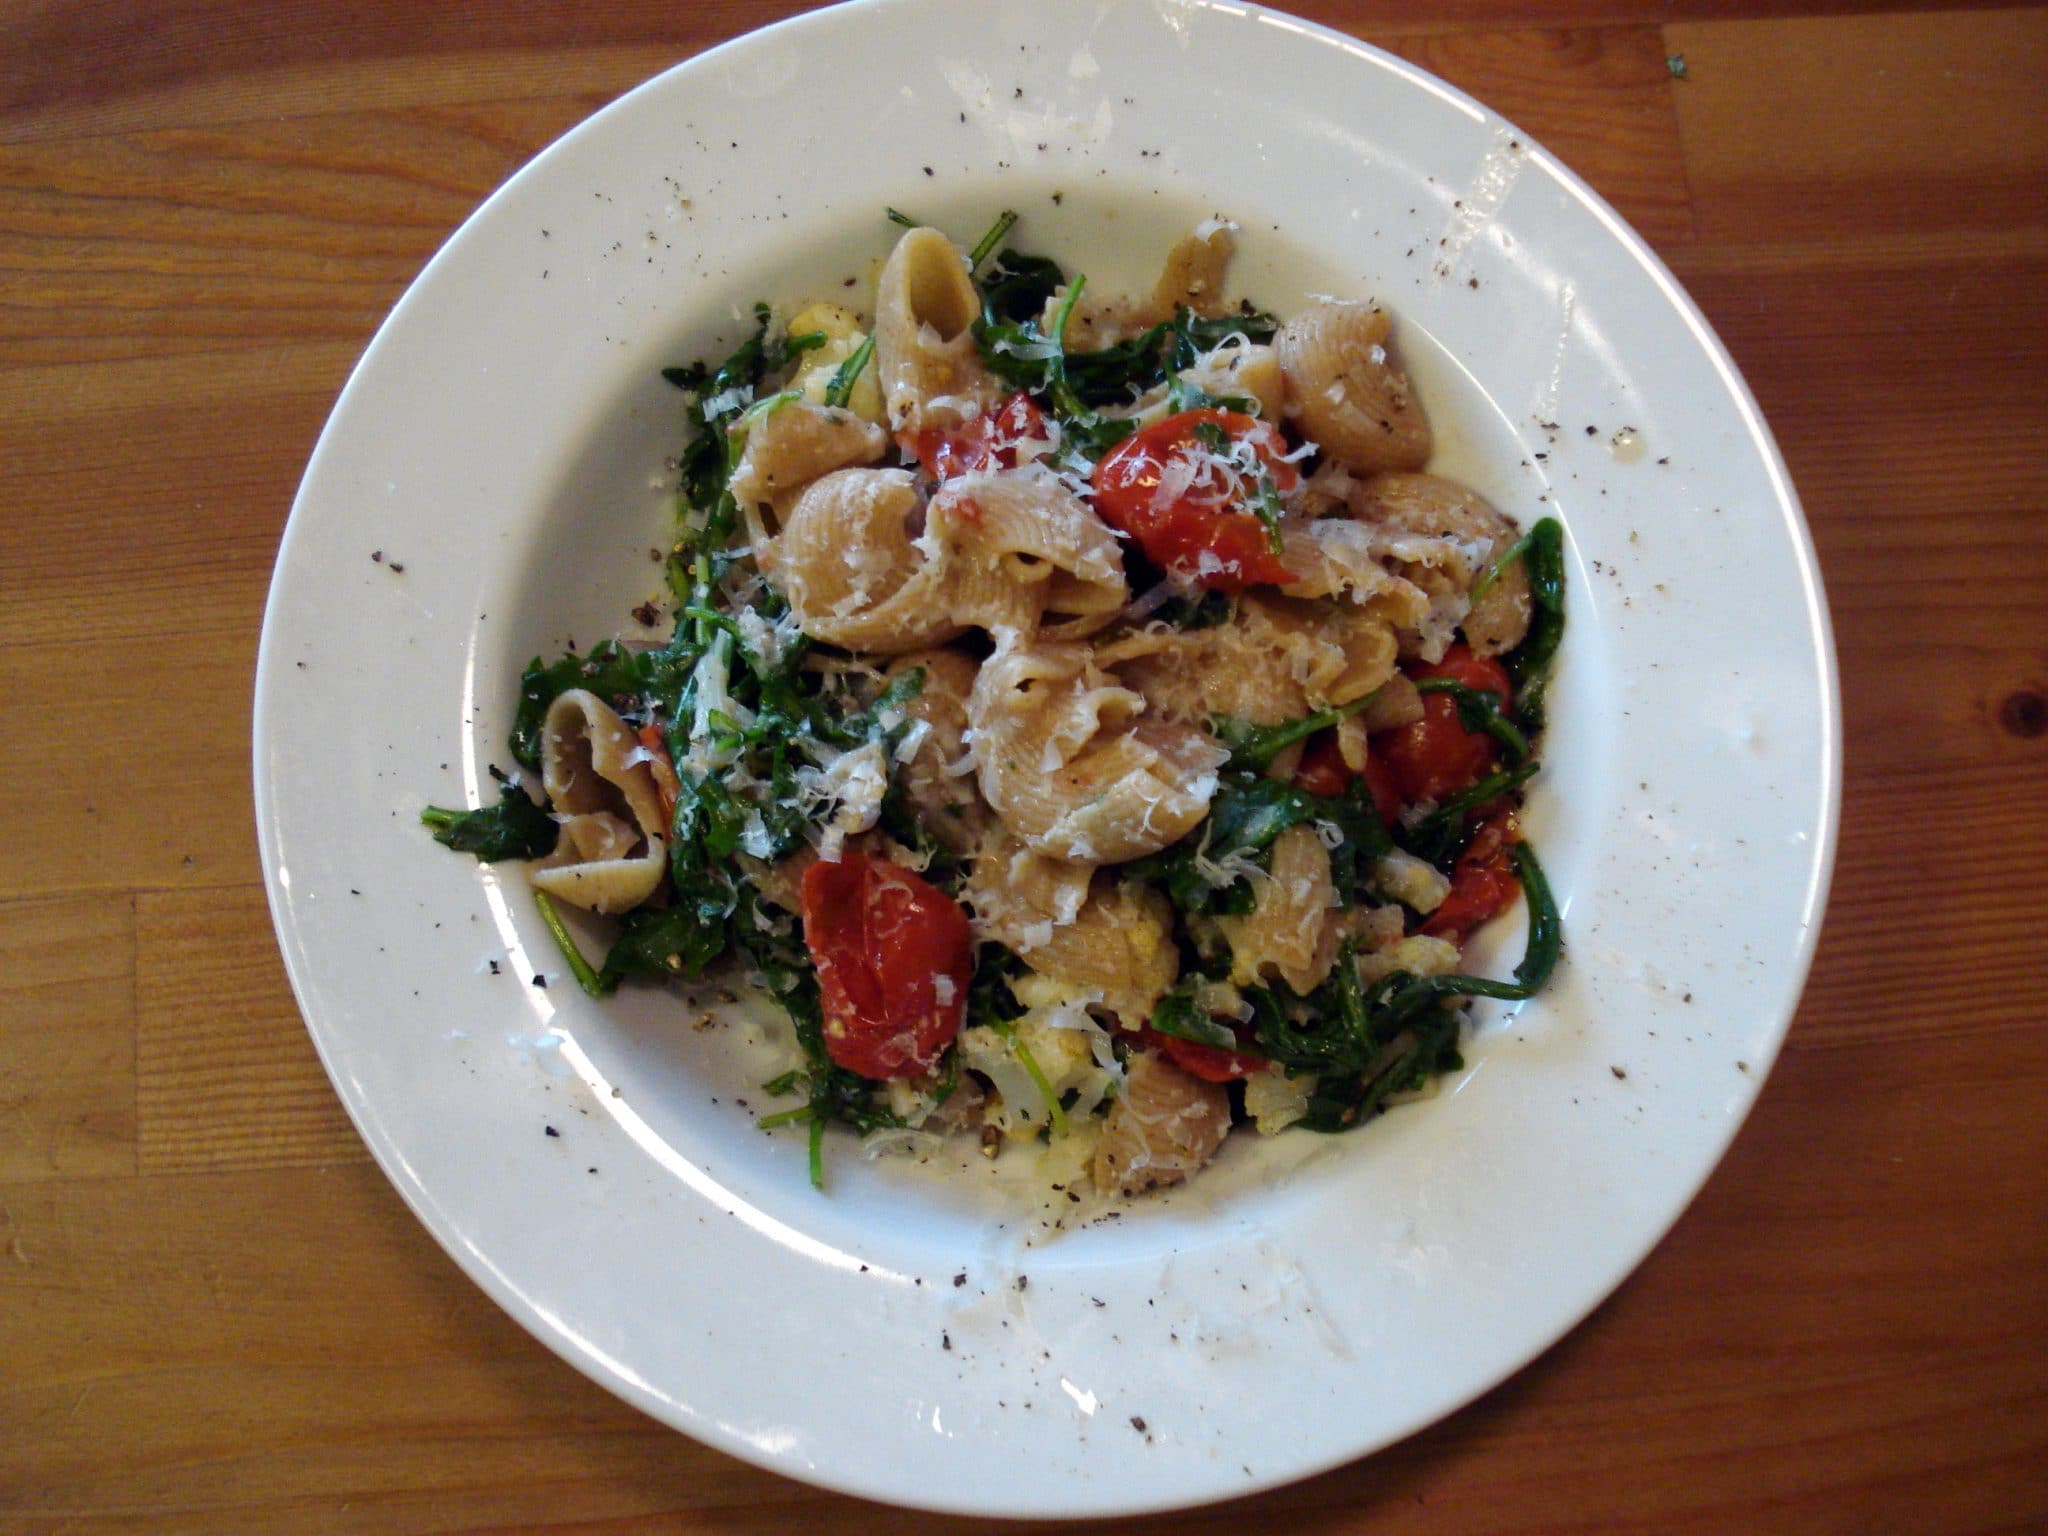 Overhead image of plate of Pasta with Roasted Cauliflower and Arugula